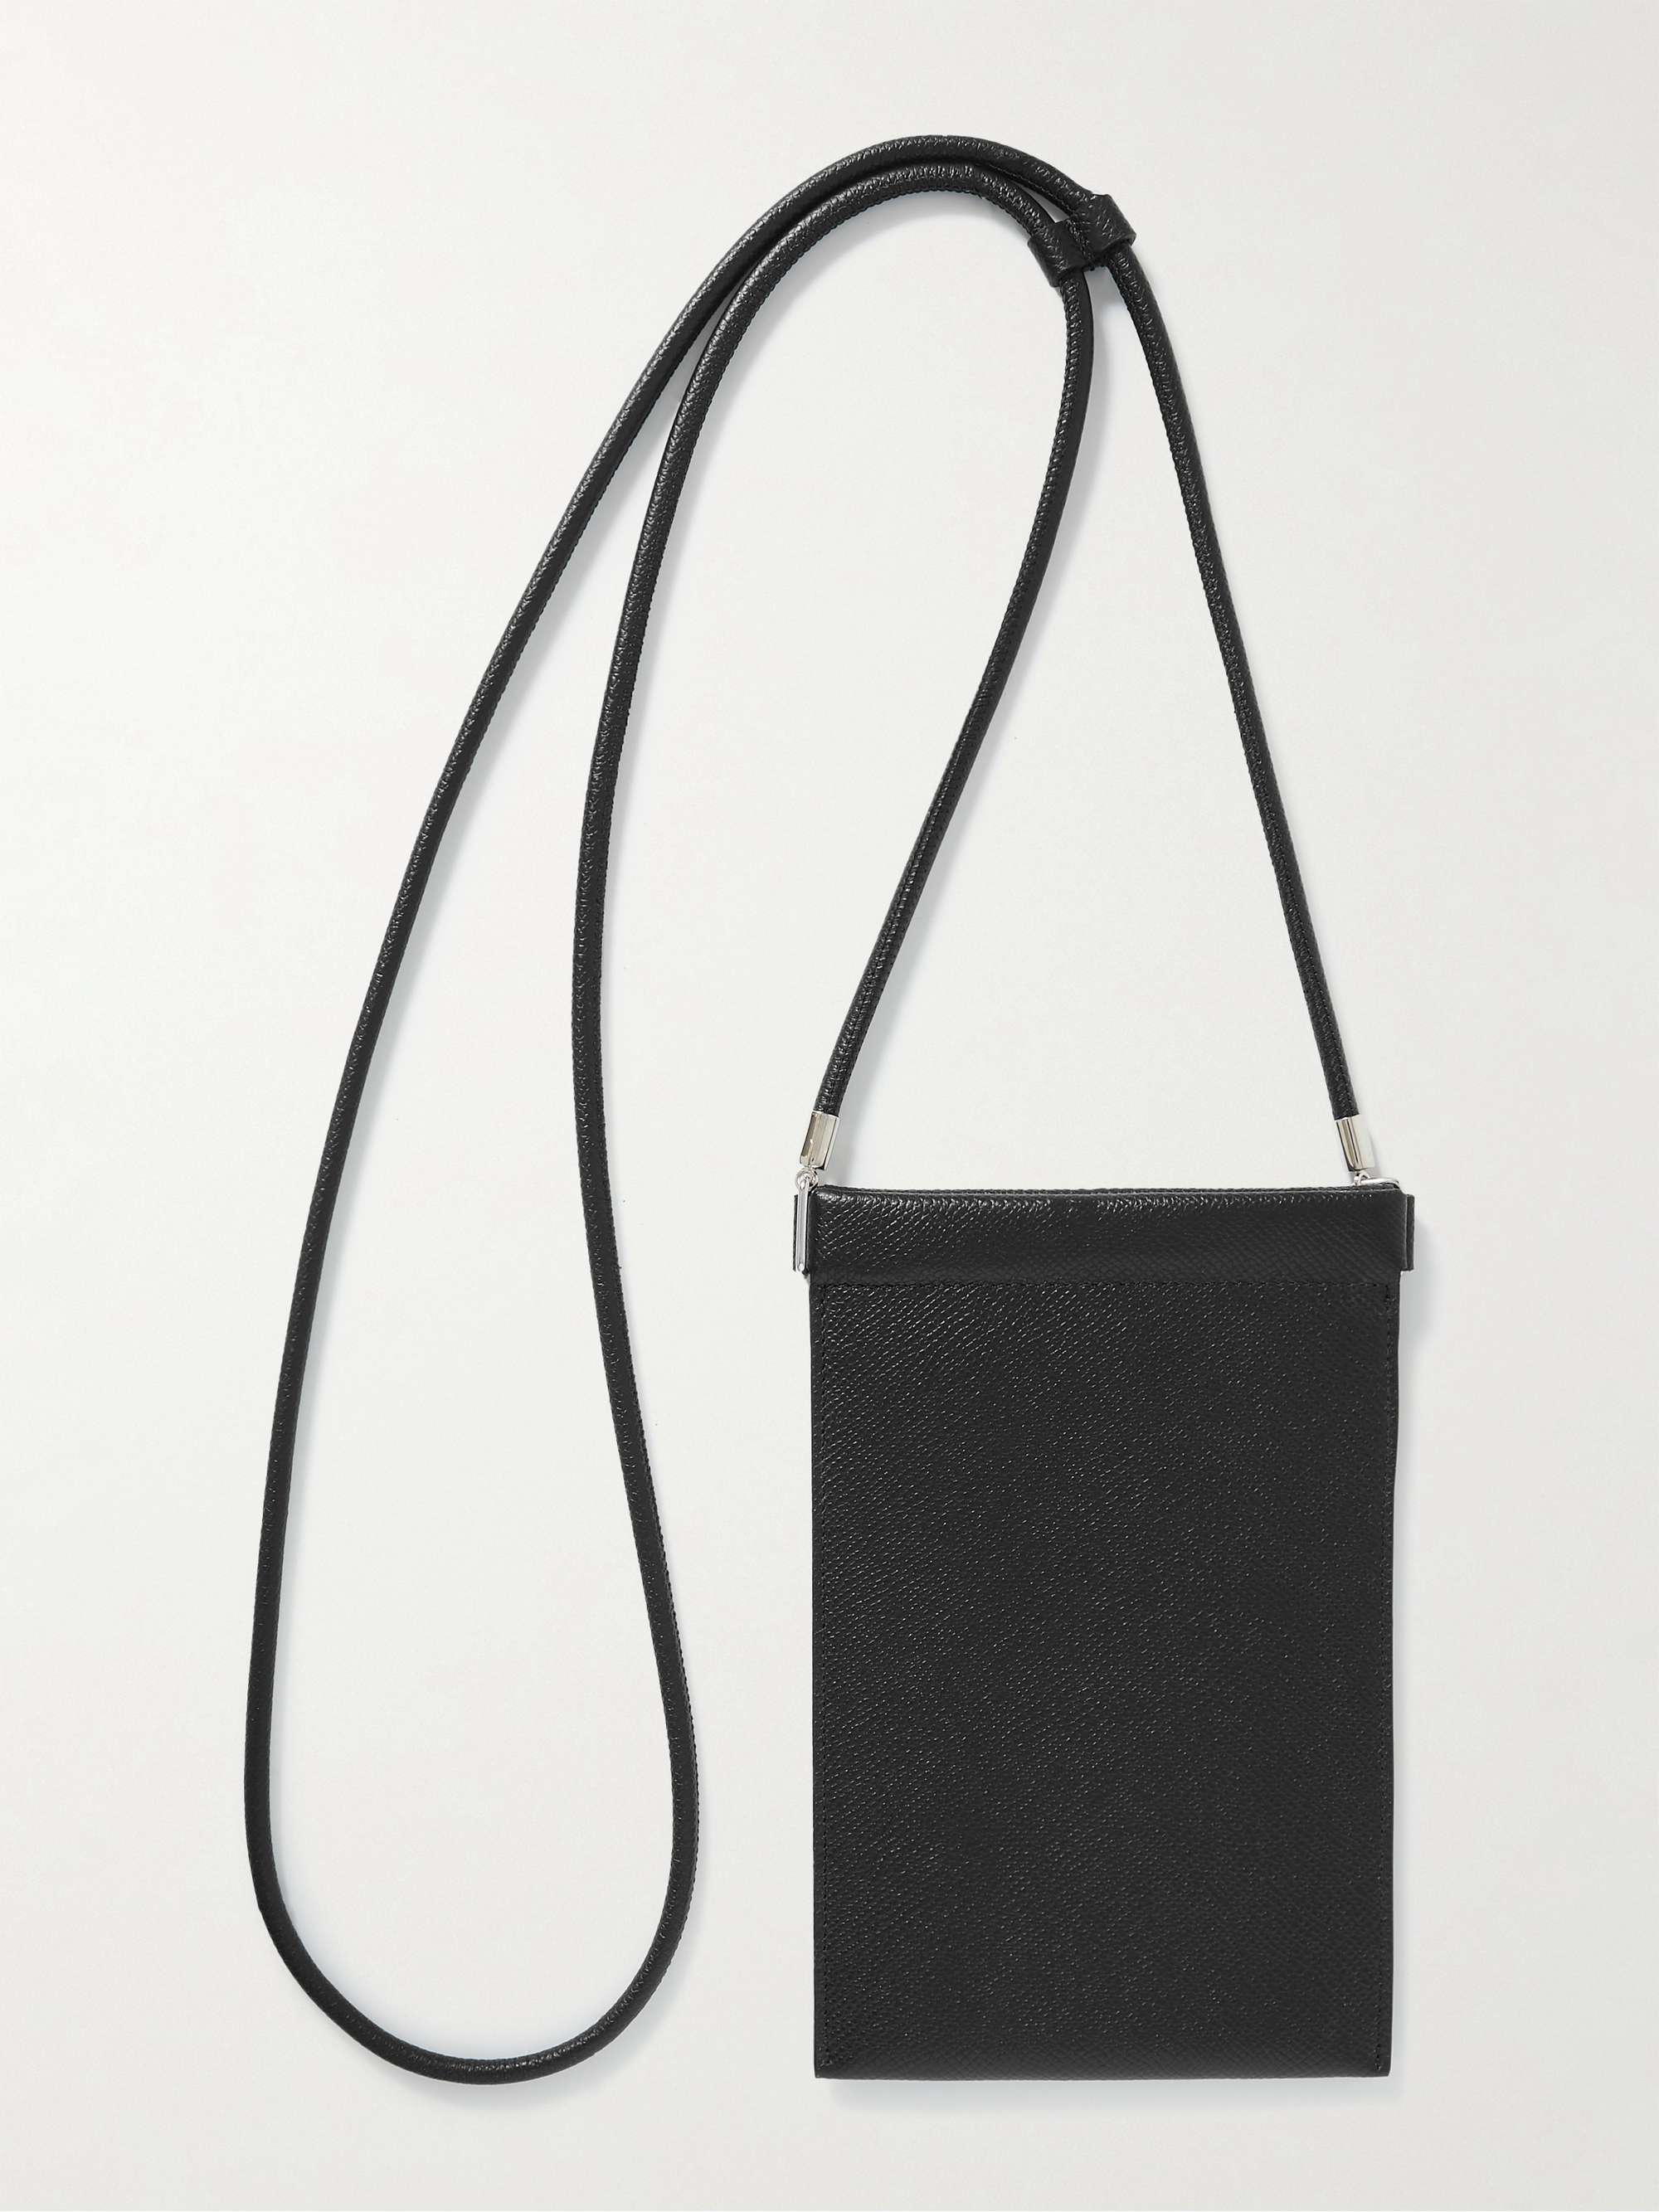 MAISON MARGIELA Full-Grain Leather Phone Pouch with Lanyard